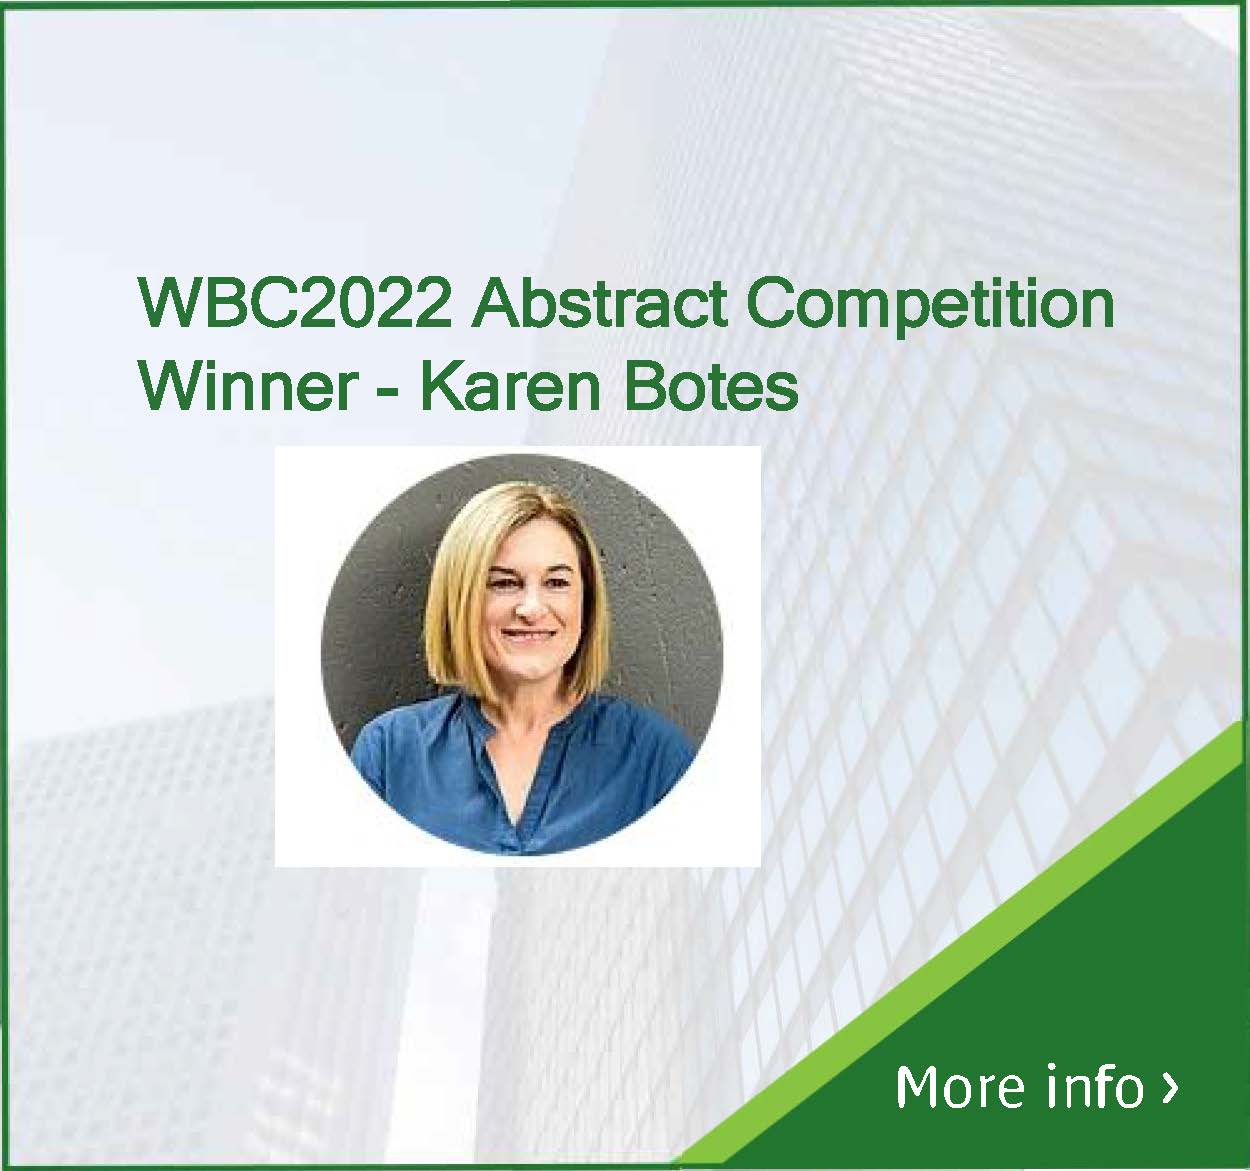 Congratulations Karen Botes, WBC 2022 Abstract Competition Winner!